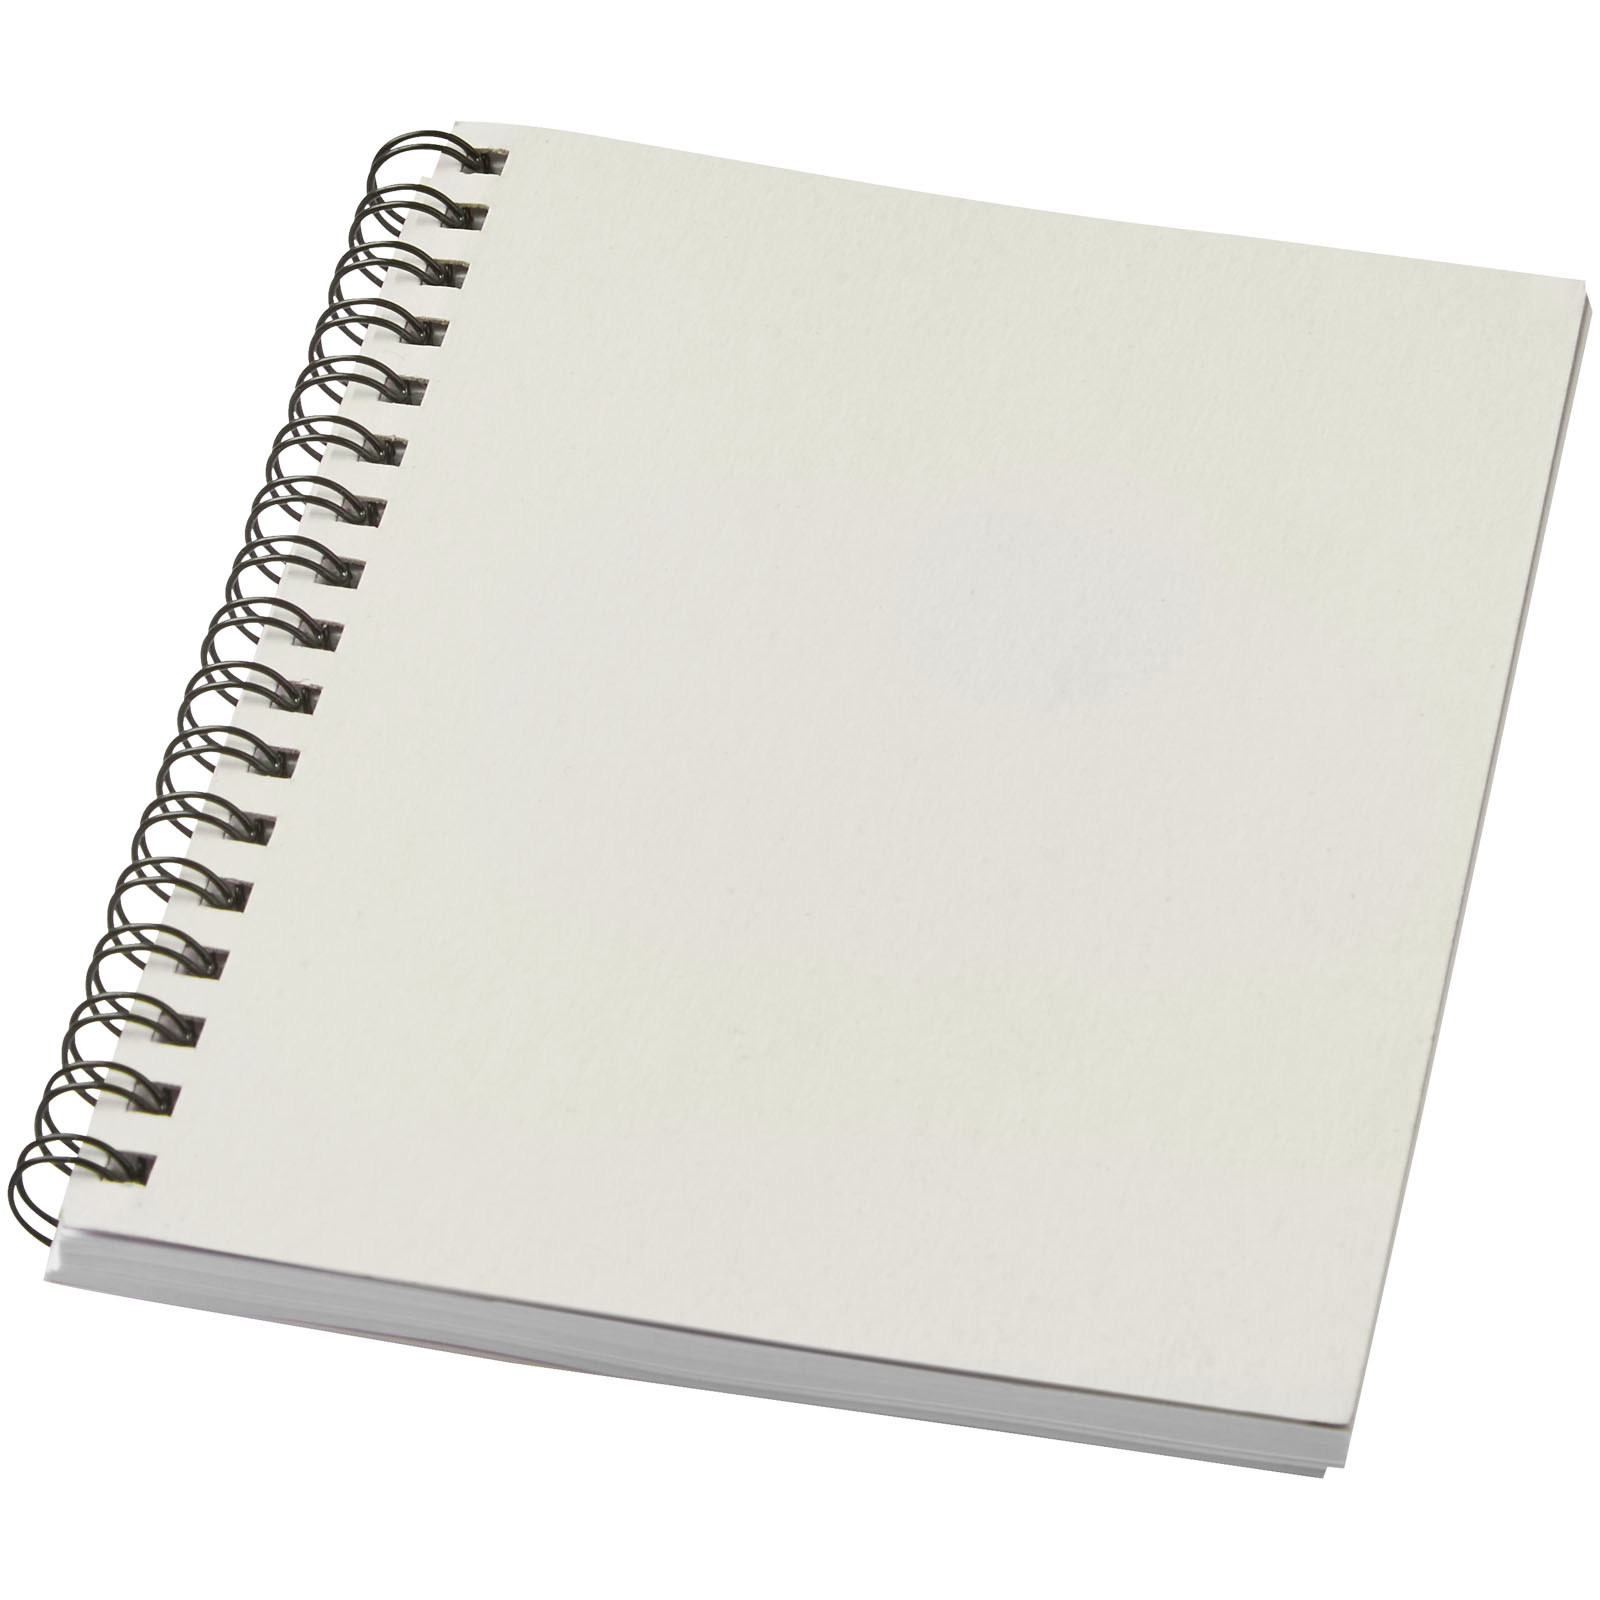 Advertising Soft cover notebooks - Desk-Mate® A6 colour spiral notebook